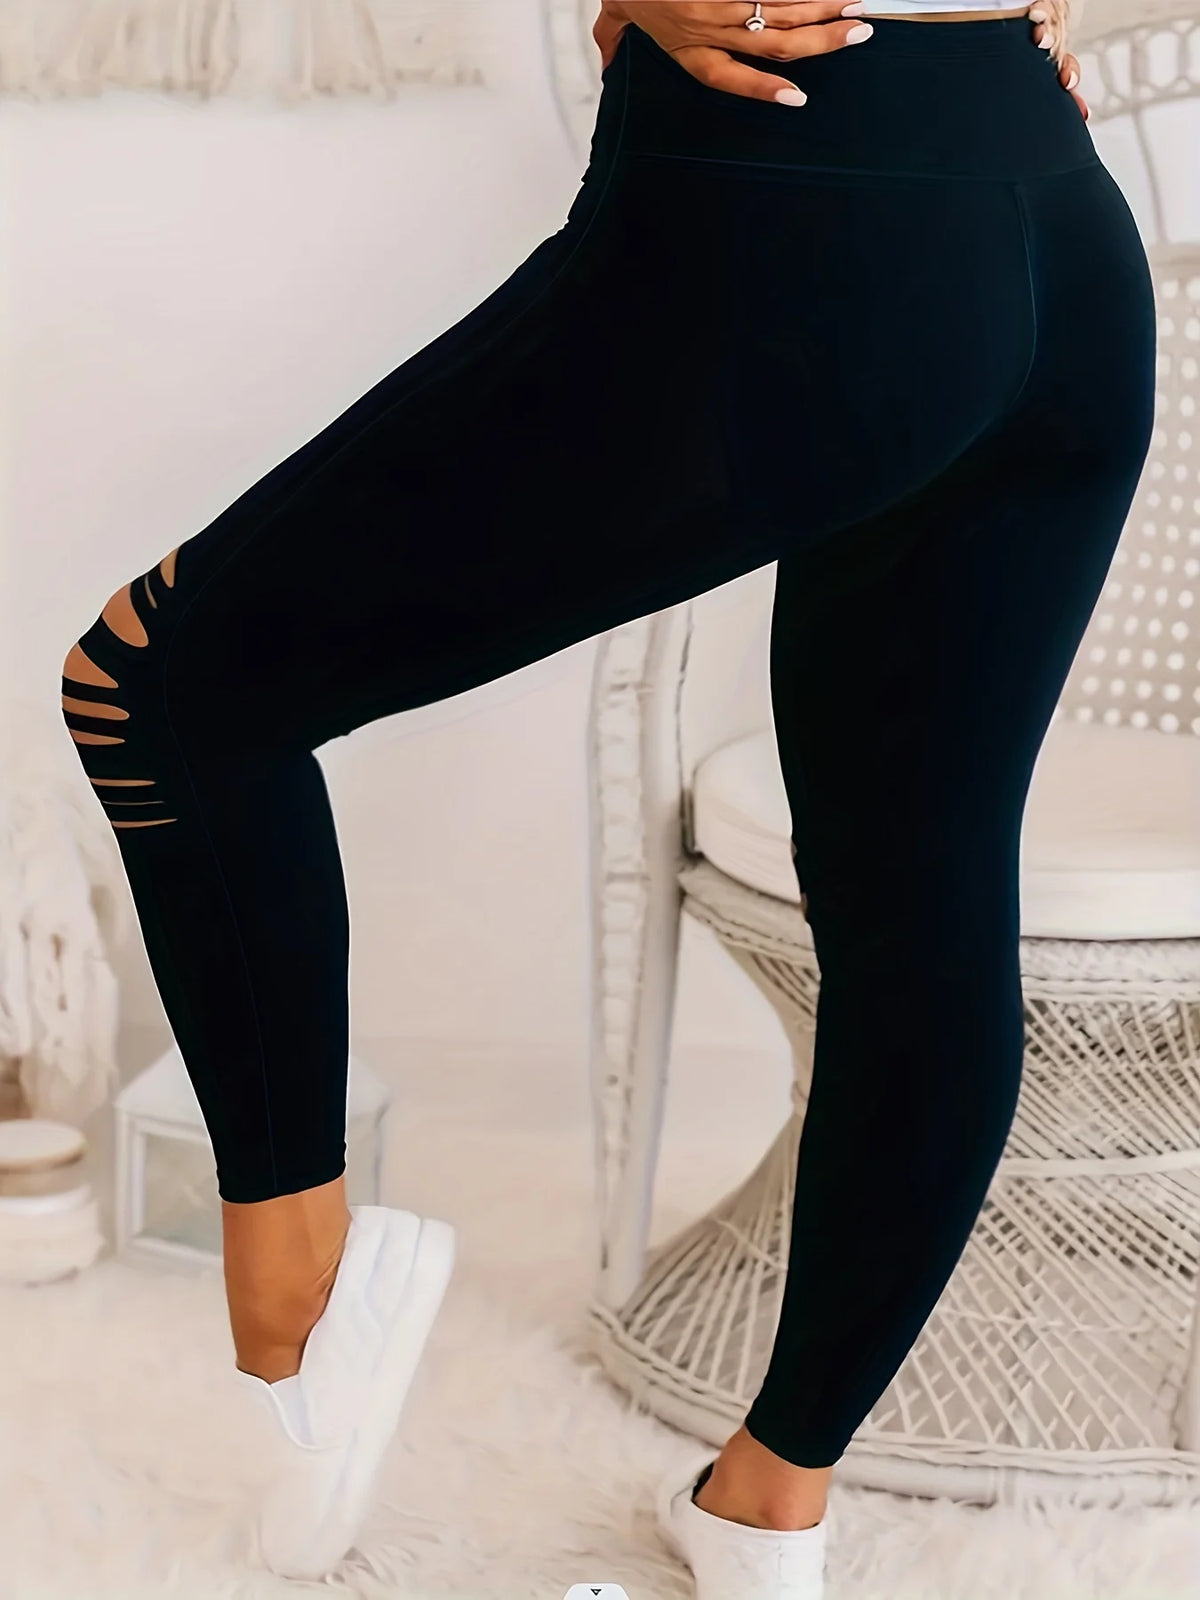 Plus Size Fashion: Women's Ripped High Elastic Leggings for Chic Style